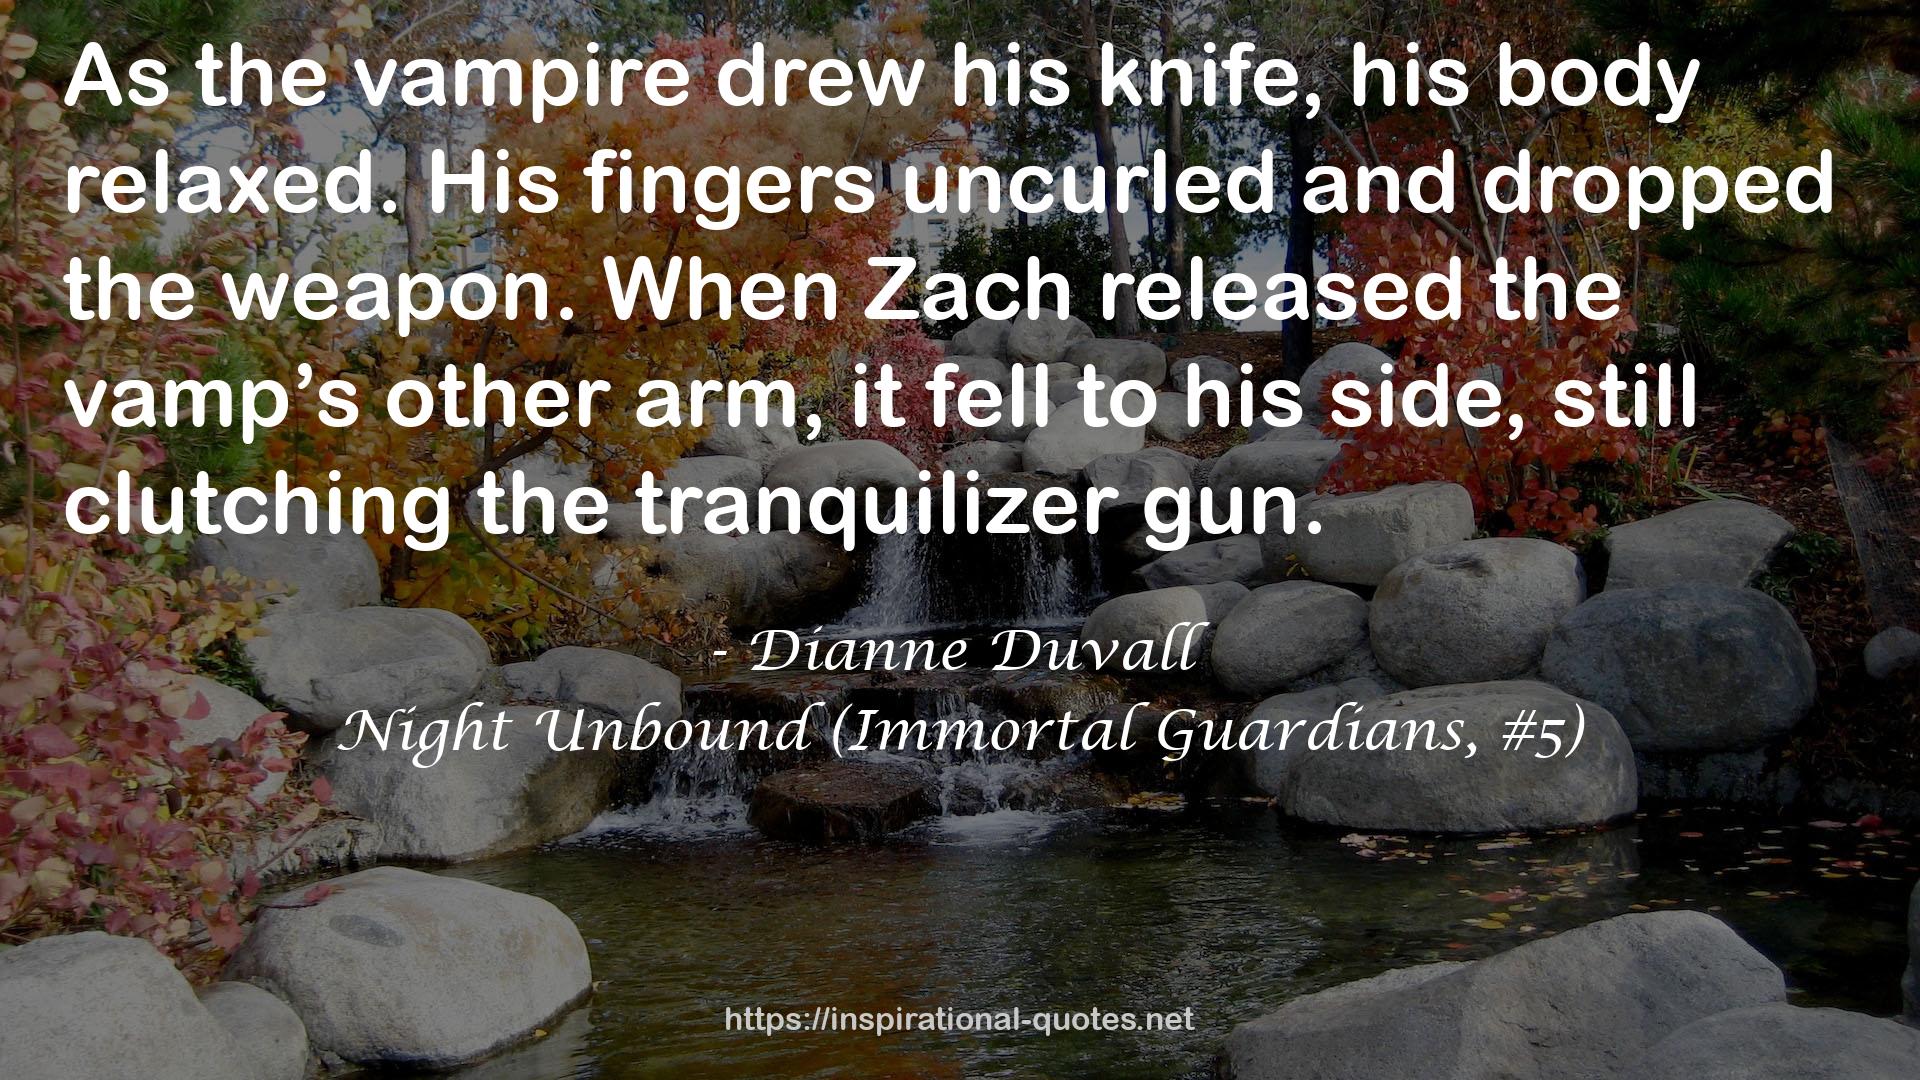 Dianne Duvall QUOTES